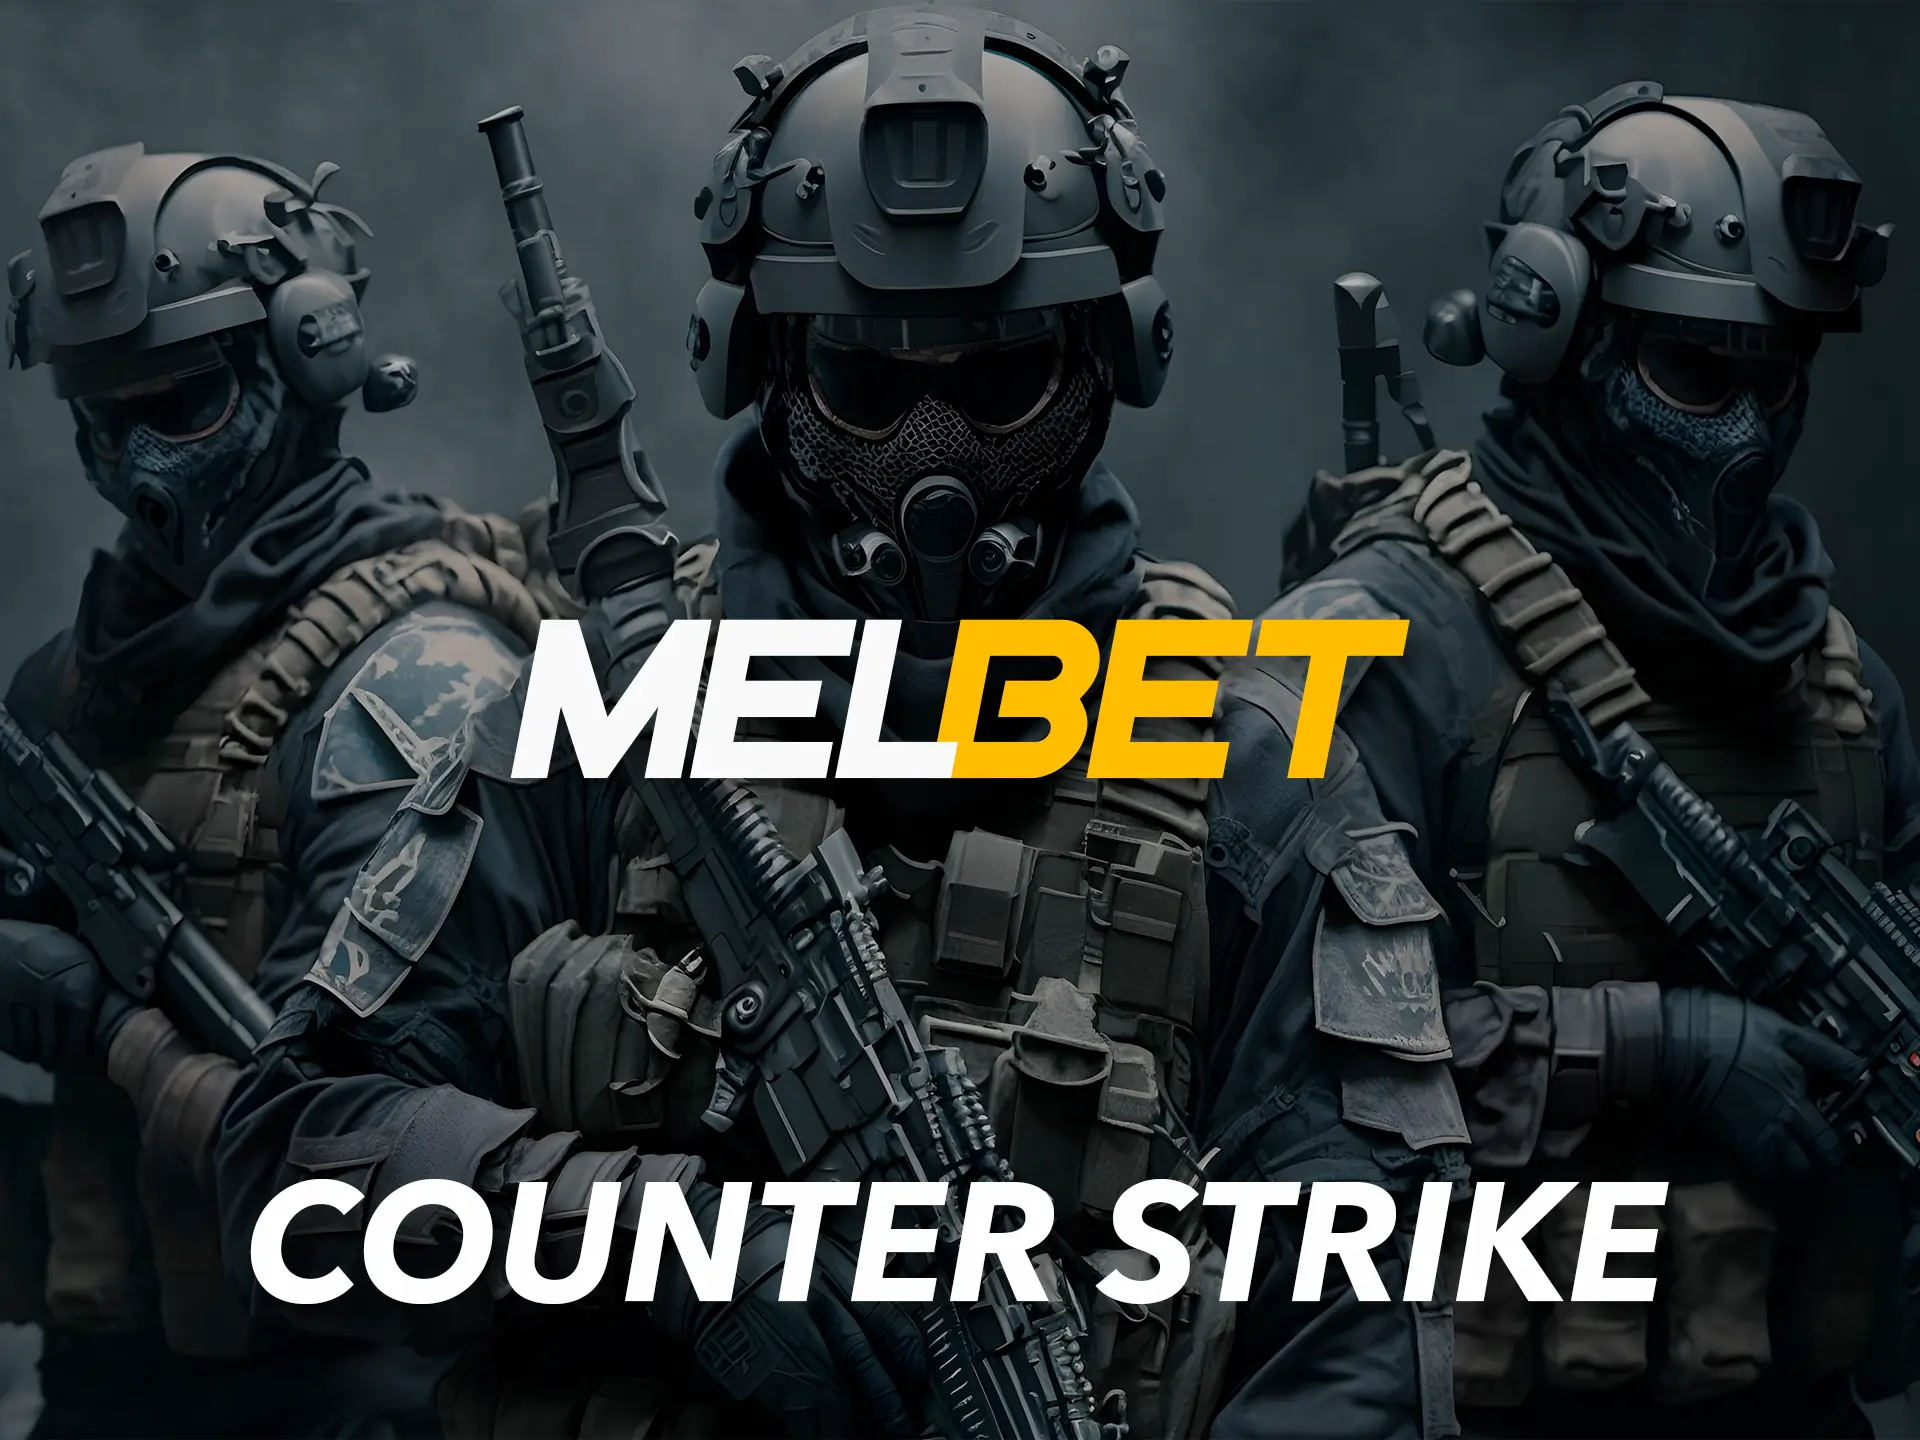 Counter strike at Melbet is a fairly predictable discipline with a variety of gameplay.